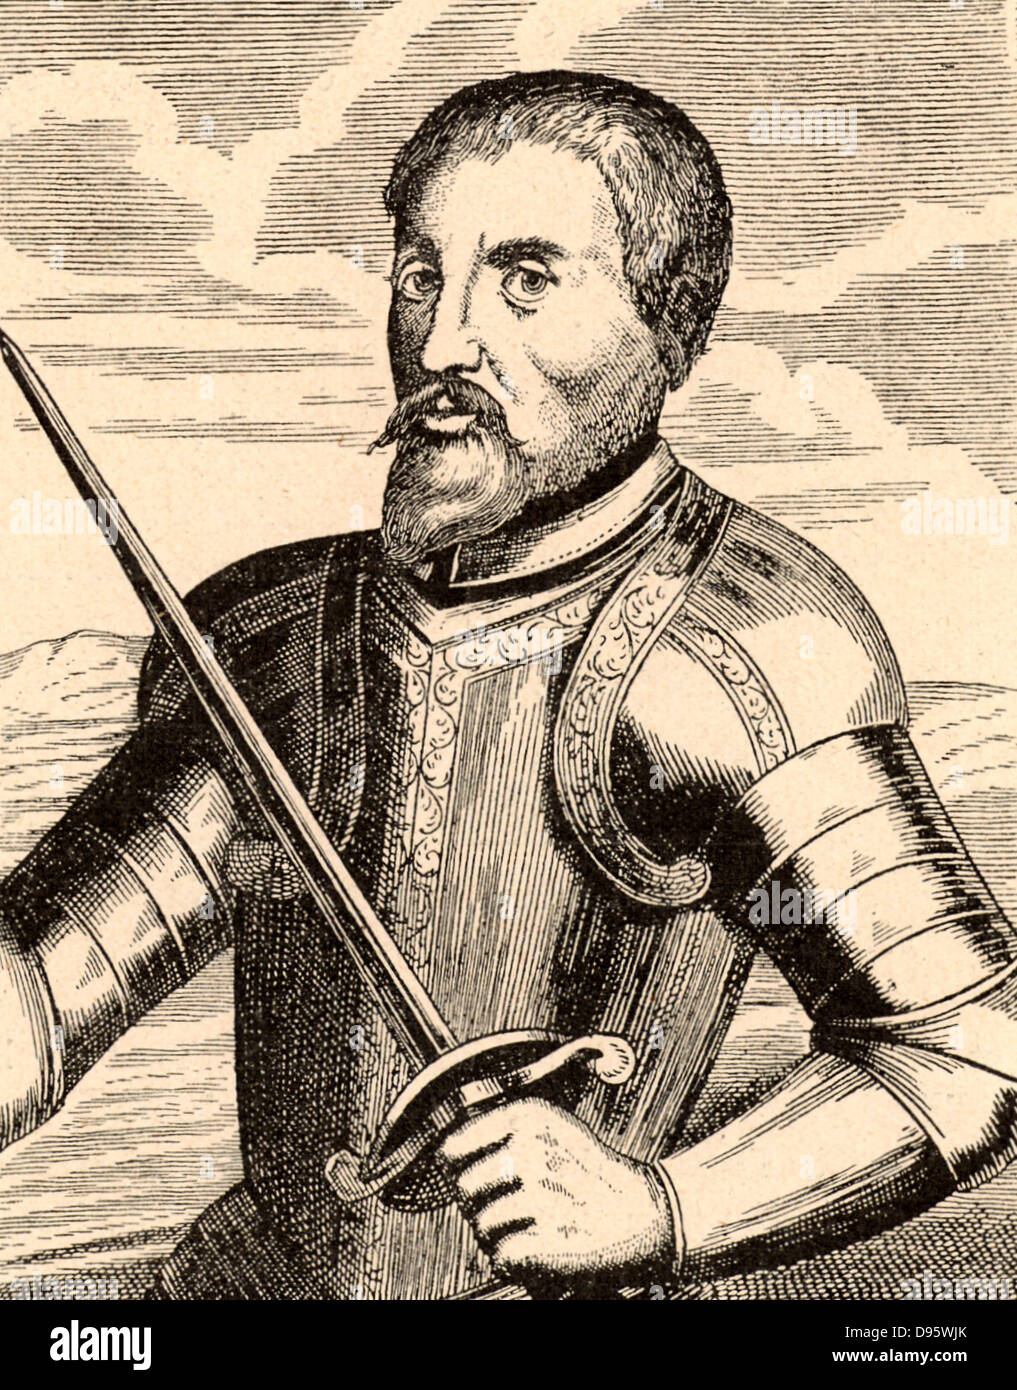 Fernando de Soto (c1496-1542) Spanish explorer and conquistador born at Xeres (Jerez) de los Caballeros, Estramadura, Spain. A member of the Spanish expedition to Darien (1518-1520), served in Nicaragua (1527) and assisted Pizzaro in the conquest of Peru. Stock Photo